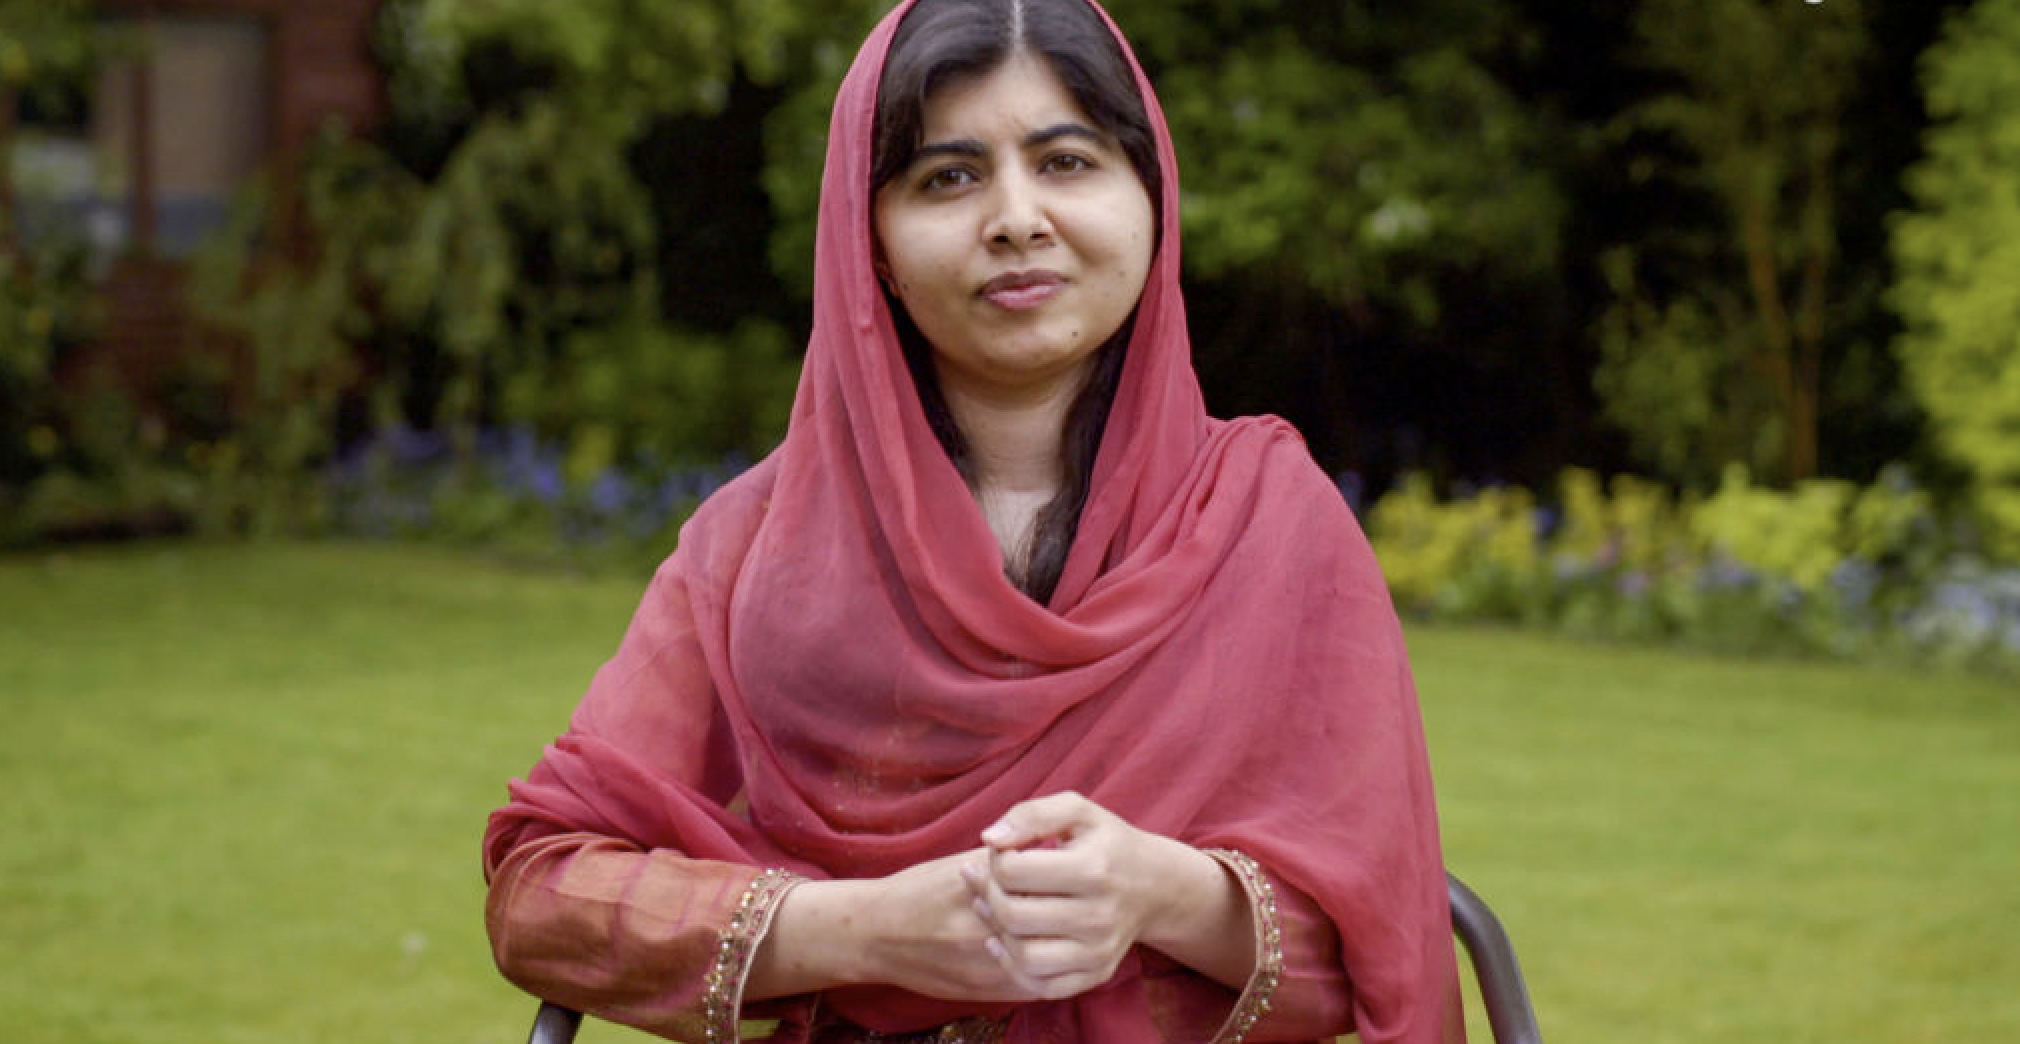 Malala sitting outside in a chair on the grass